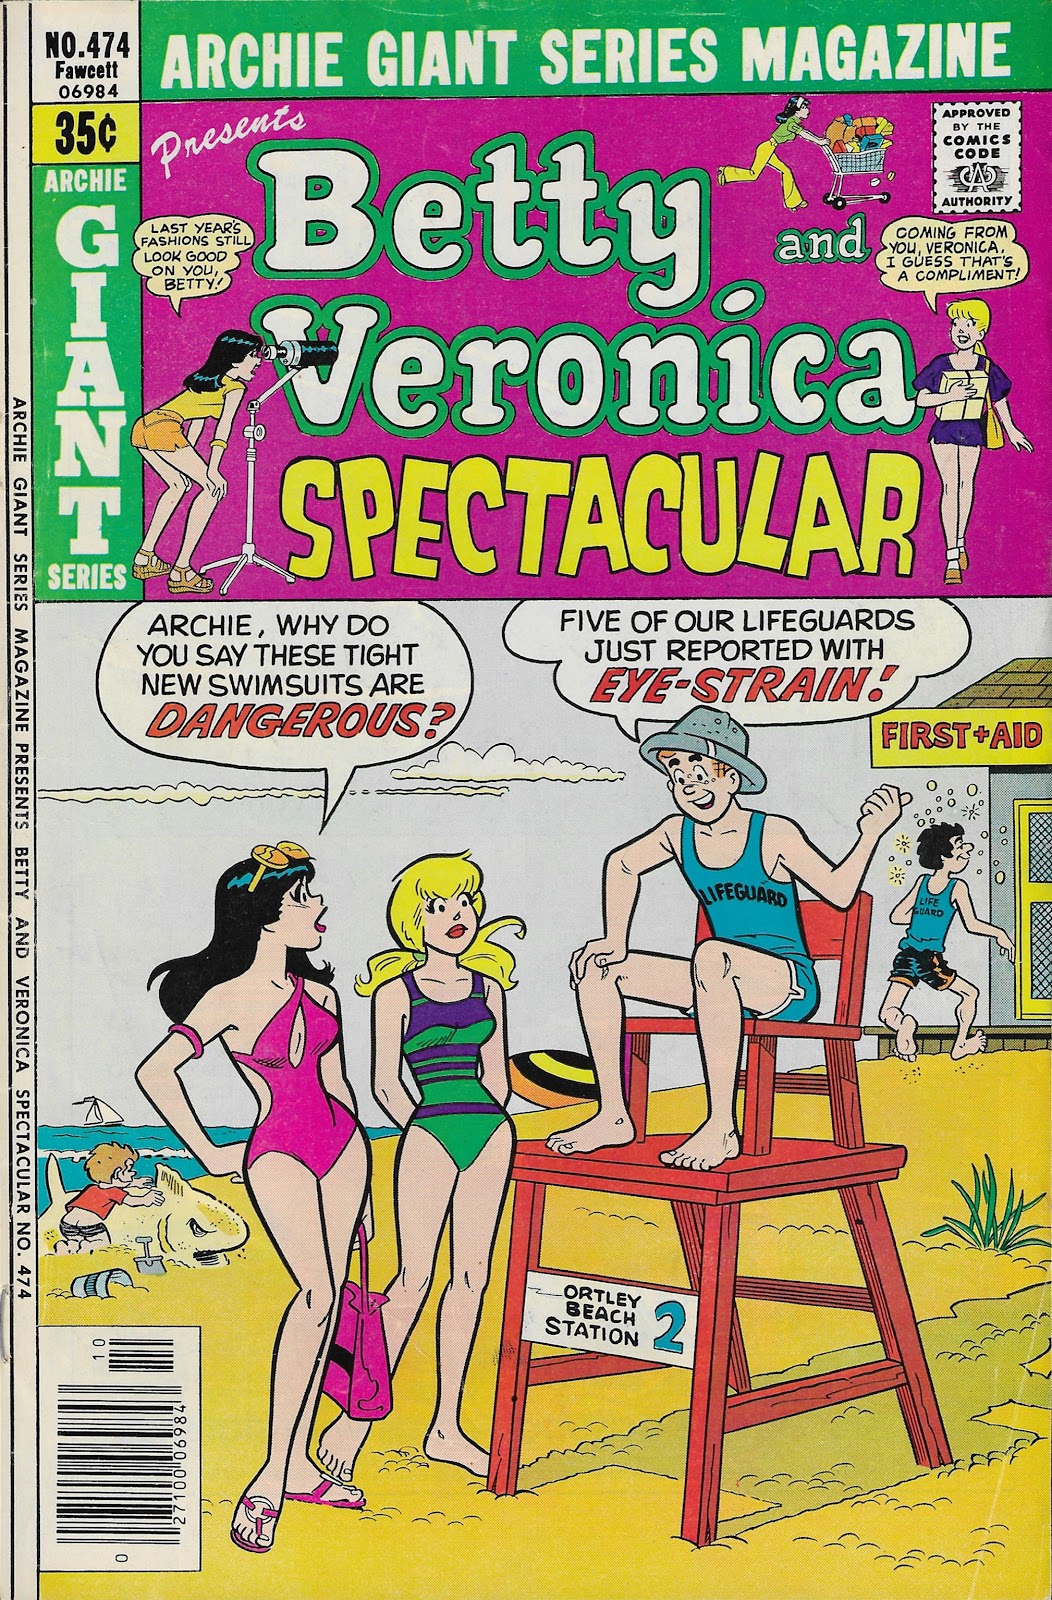 Archie Giant Series Magazine issue 474 - Page 1